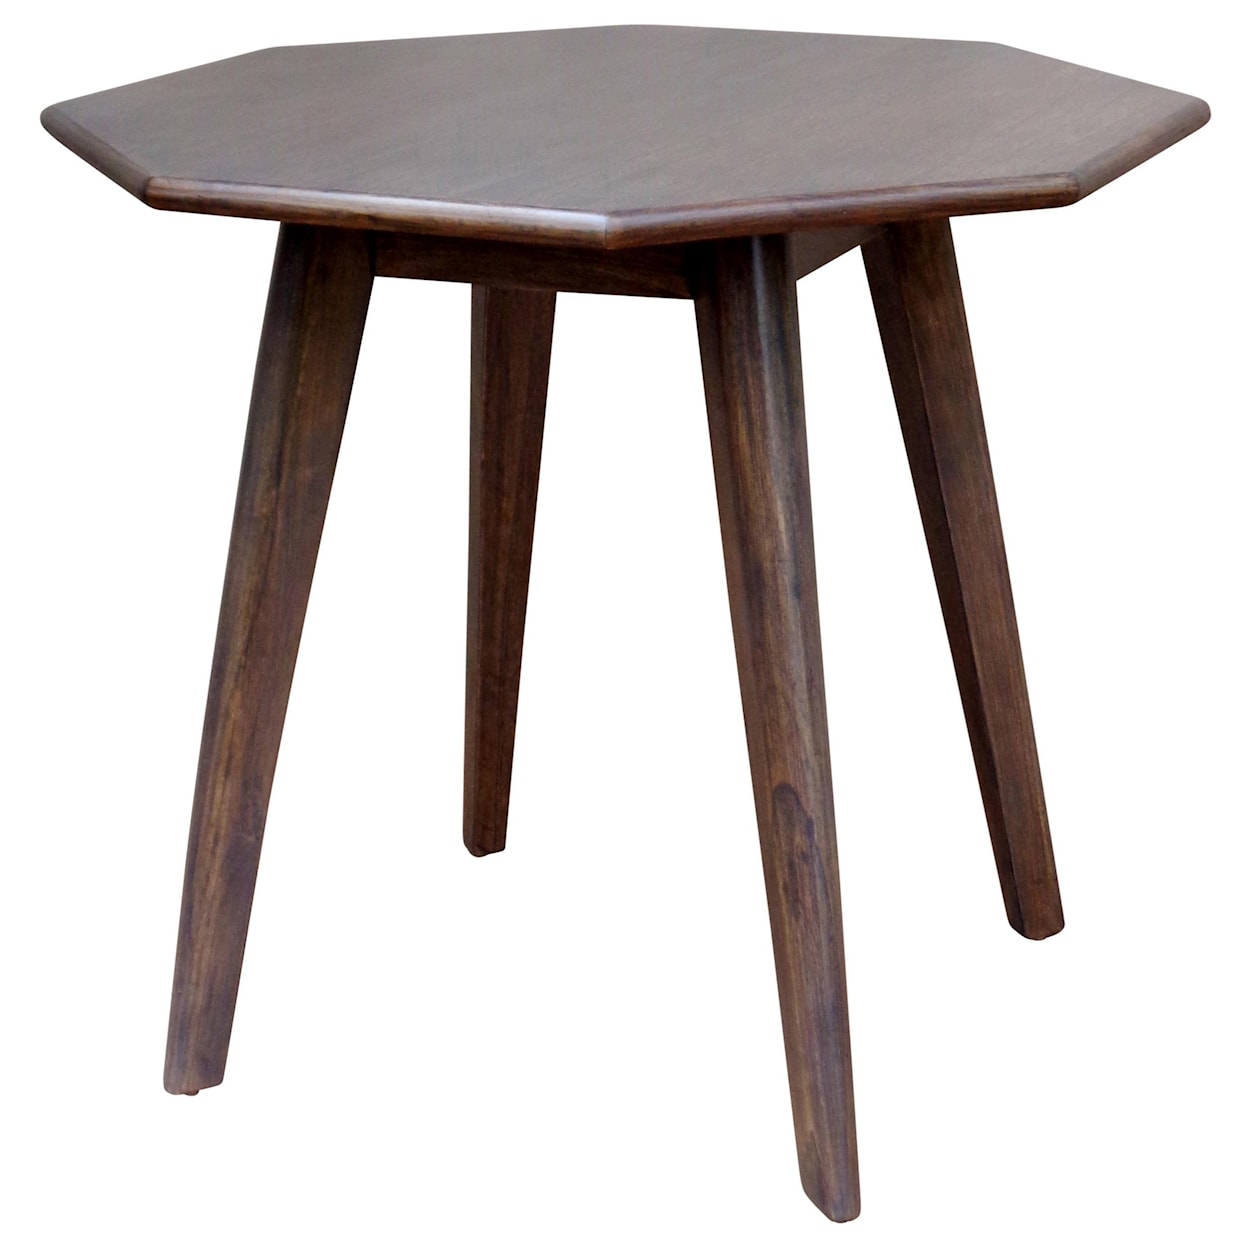 Trade Winds Furniture Occasional Table Groups Nantucket Lamp Table